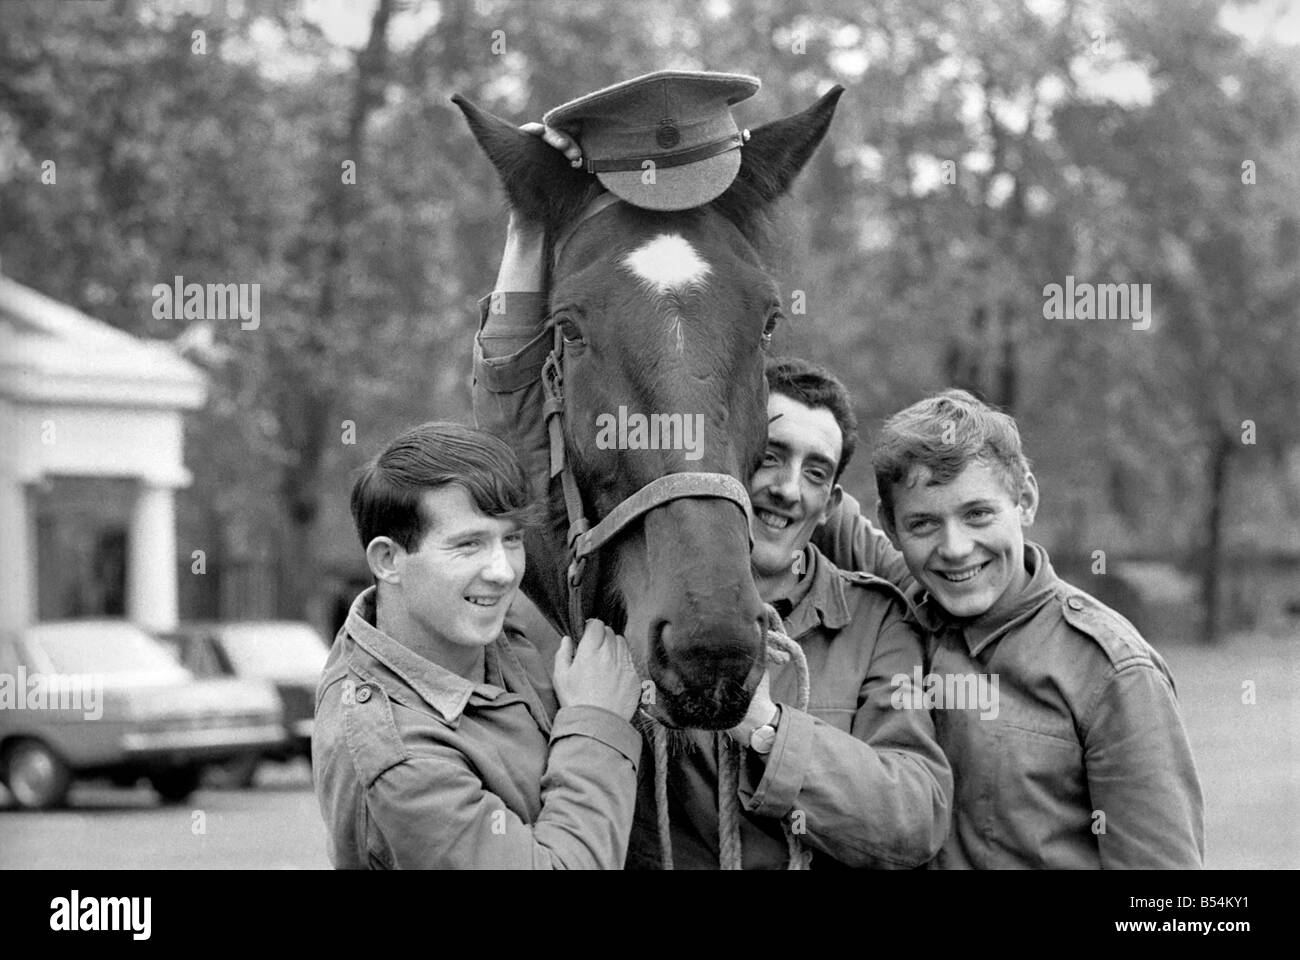 Stalin a young gelding who is one of the Queen's unwanted horses, has been given a reprieve and an attempt to re-train him is about to begin. November 1969 Z11167-001 Stock Photo